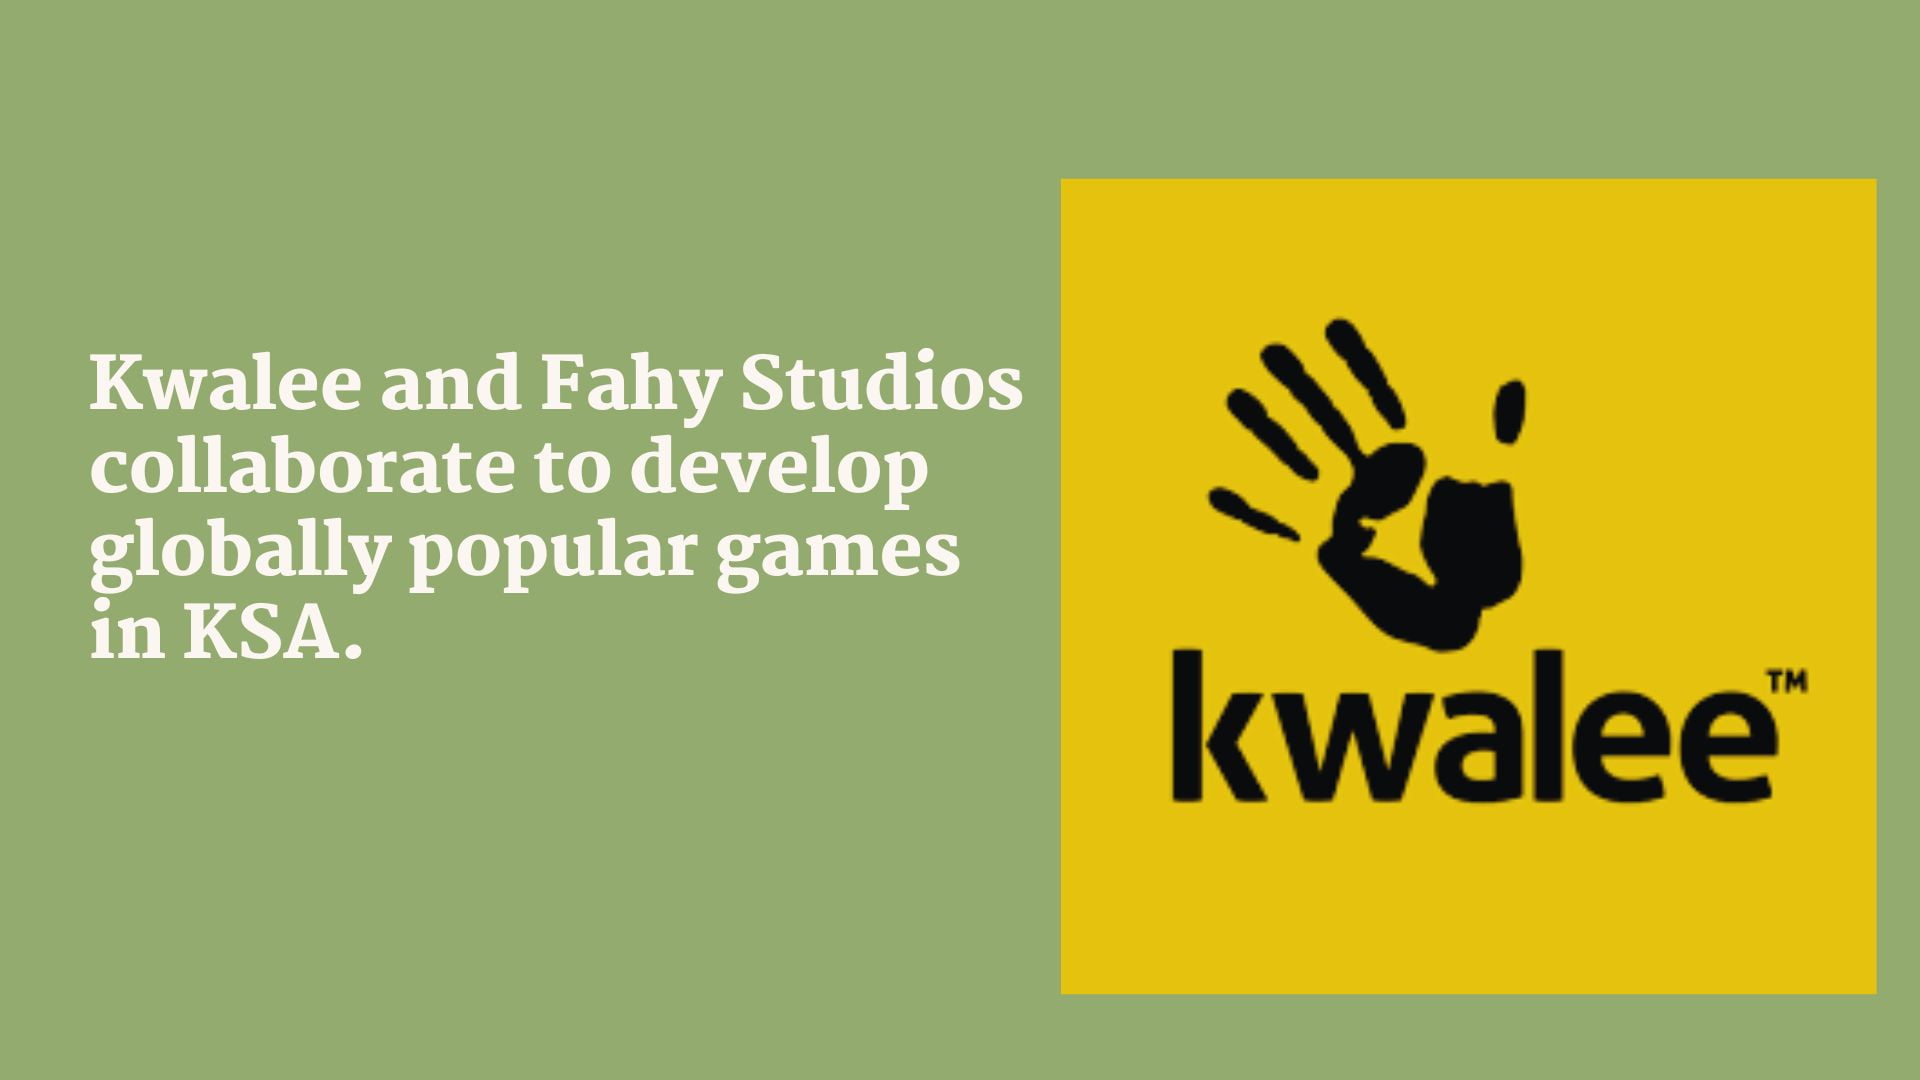 Kwalee and Fahy Studios collaborate to develop globally popular games in KSA.